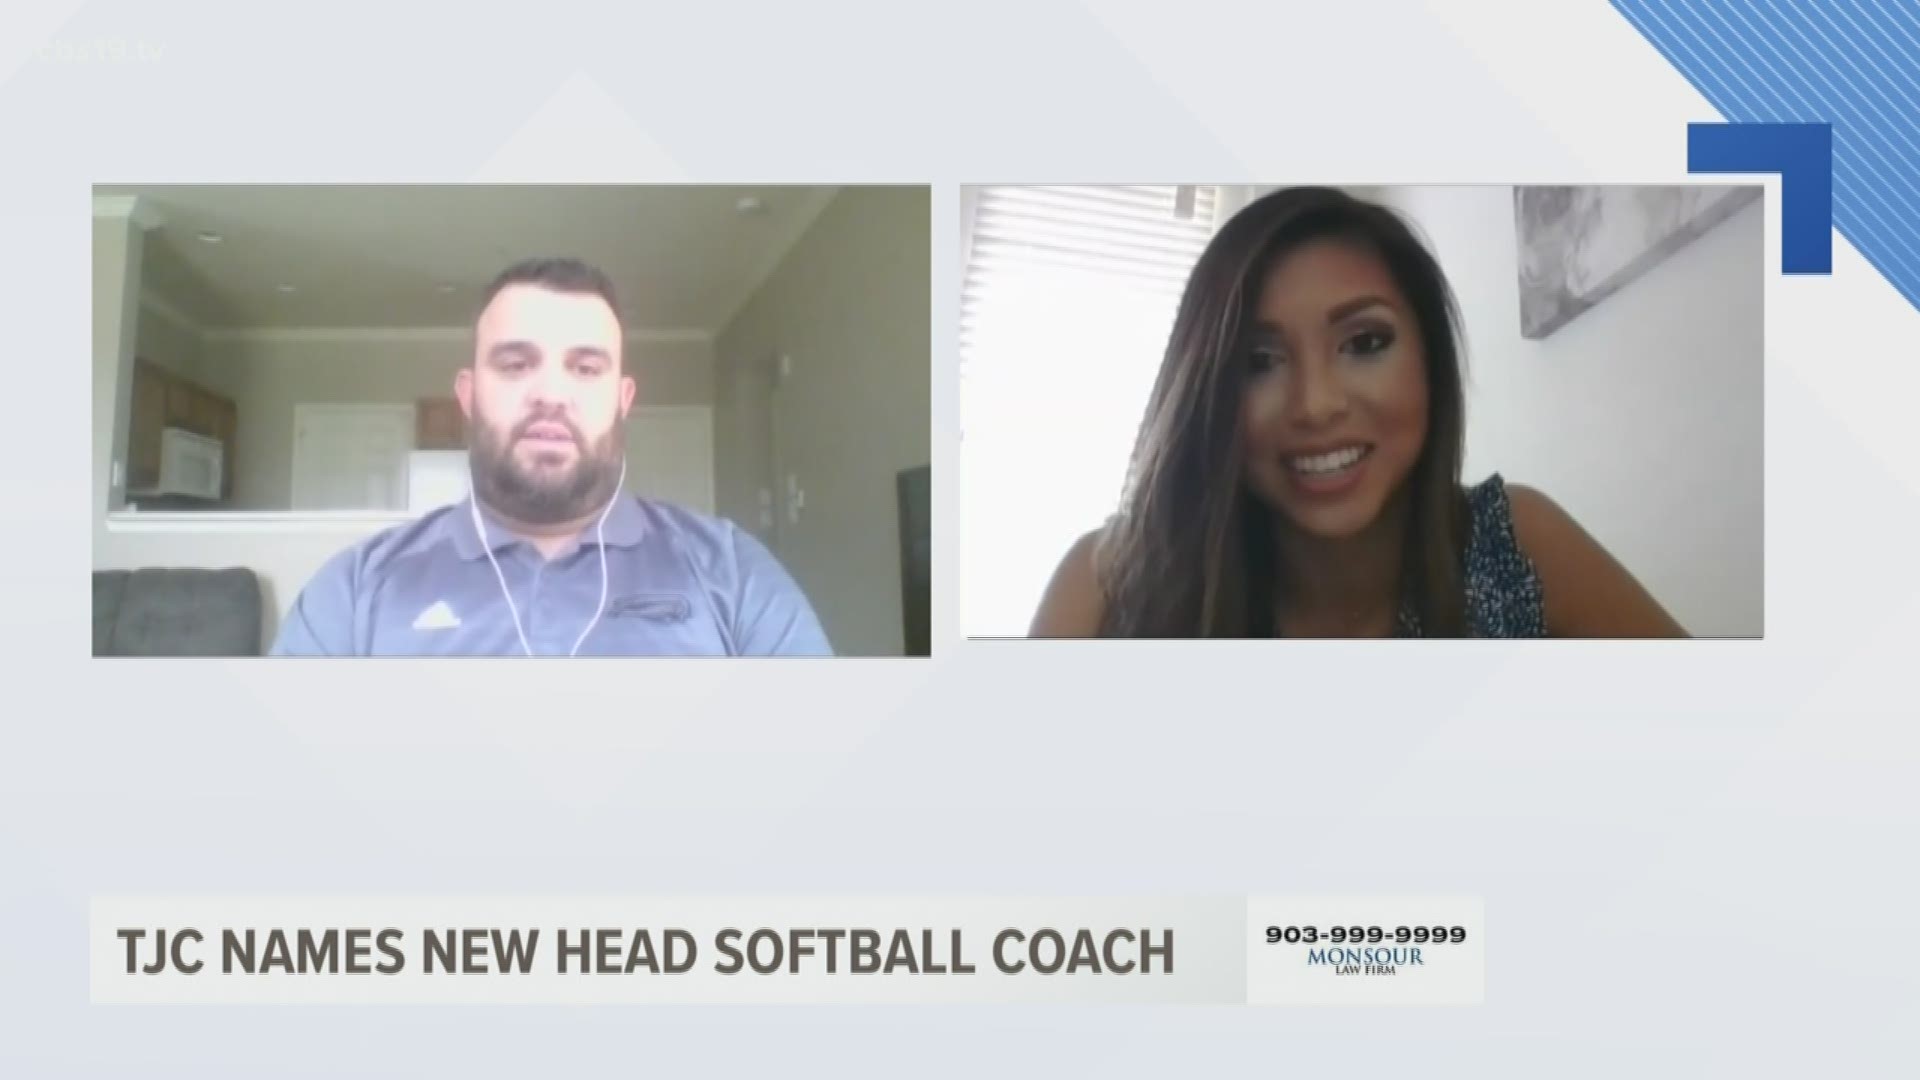 Eric Henderson joins CBS 19 Sports' Tina Nguyen to discuss what it means to be named the third head softball coach in TJC program history.